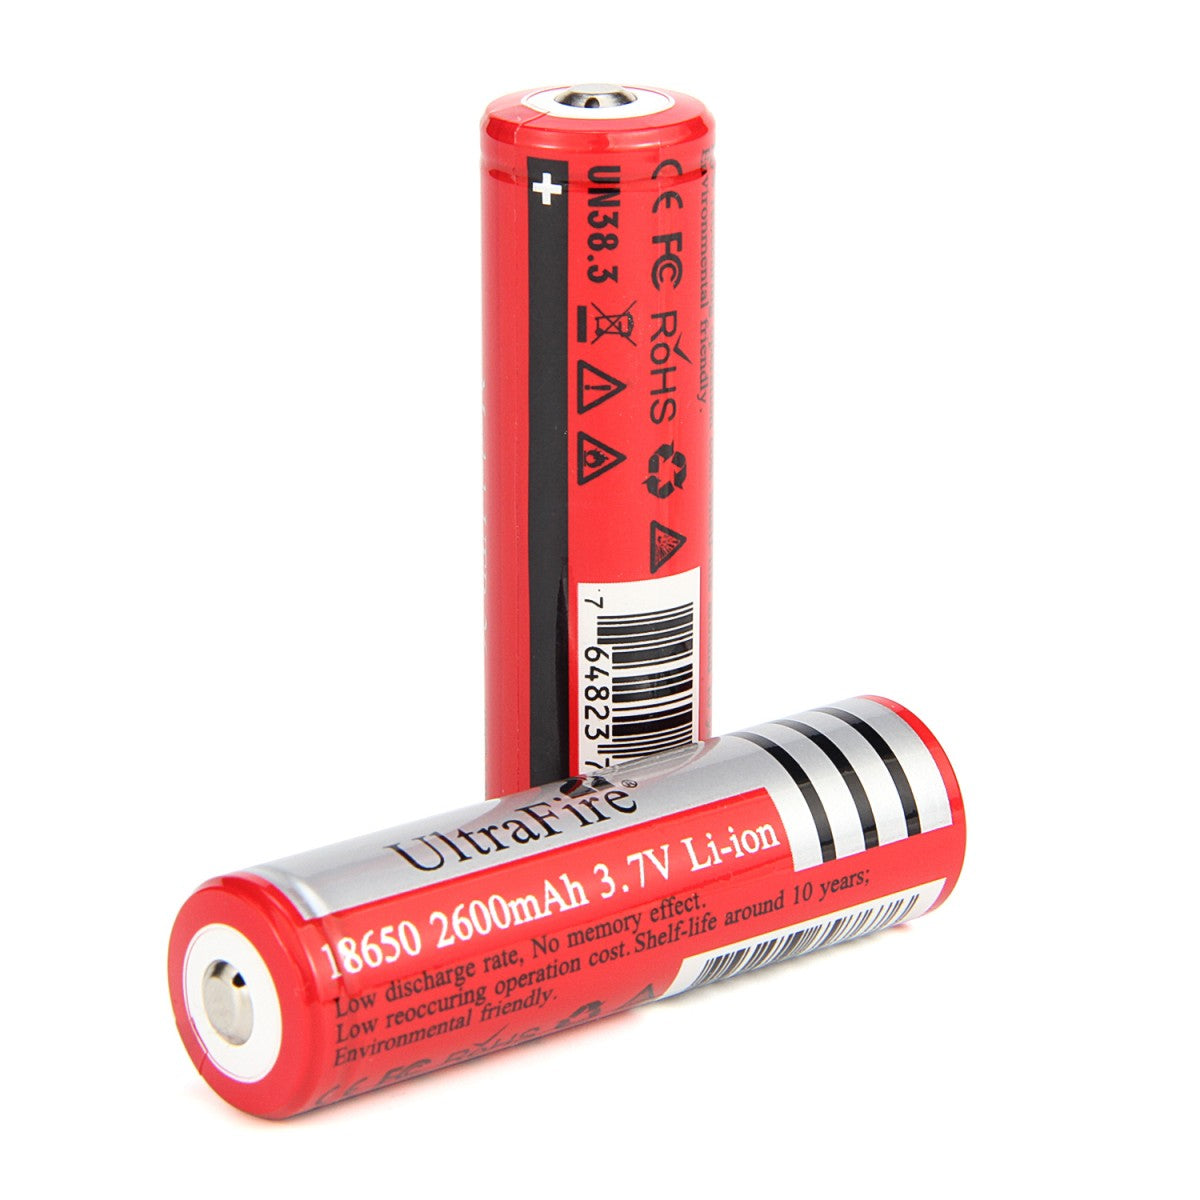 3.7V/7.4V 2600-9600mAh 5C 18650 Lithium Battery+XH Wire+Board Pack